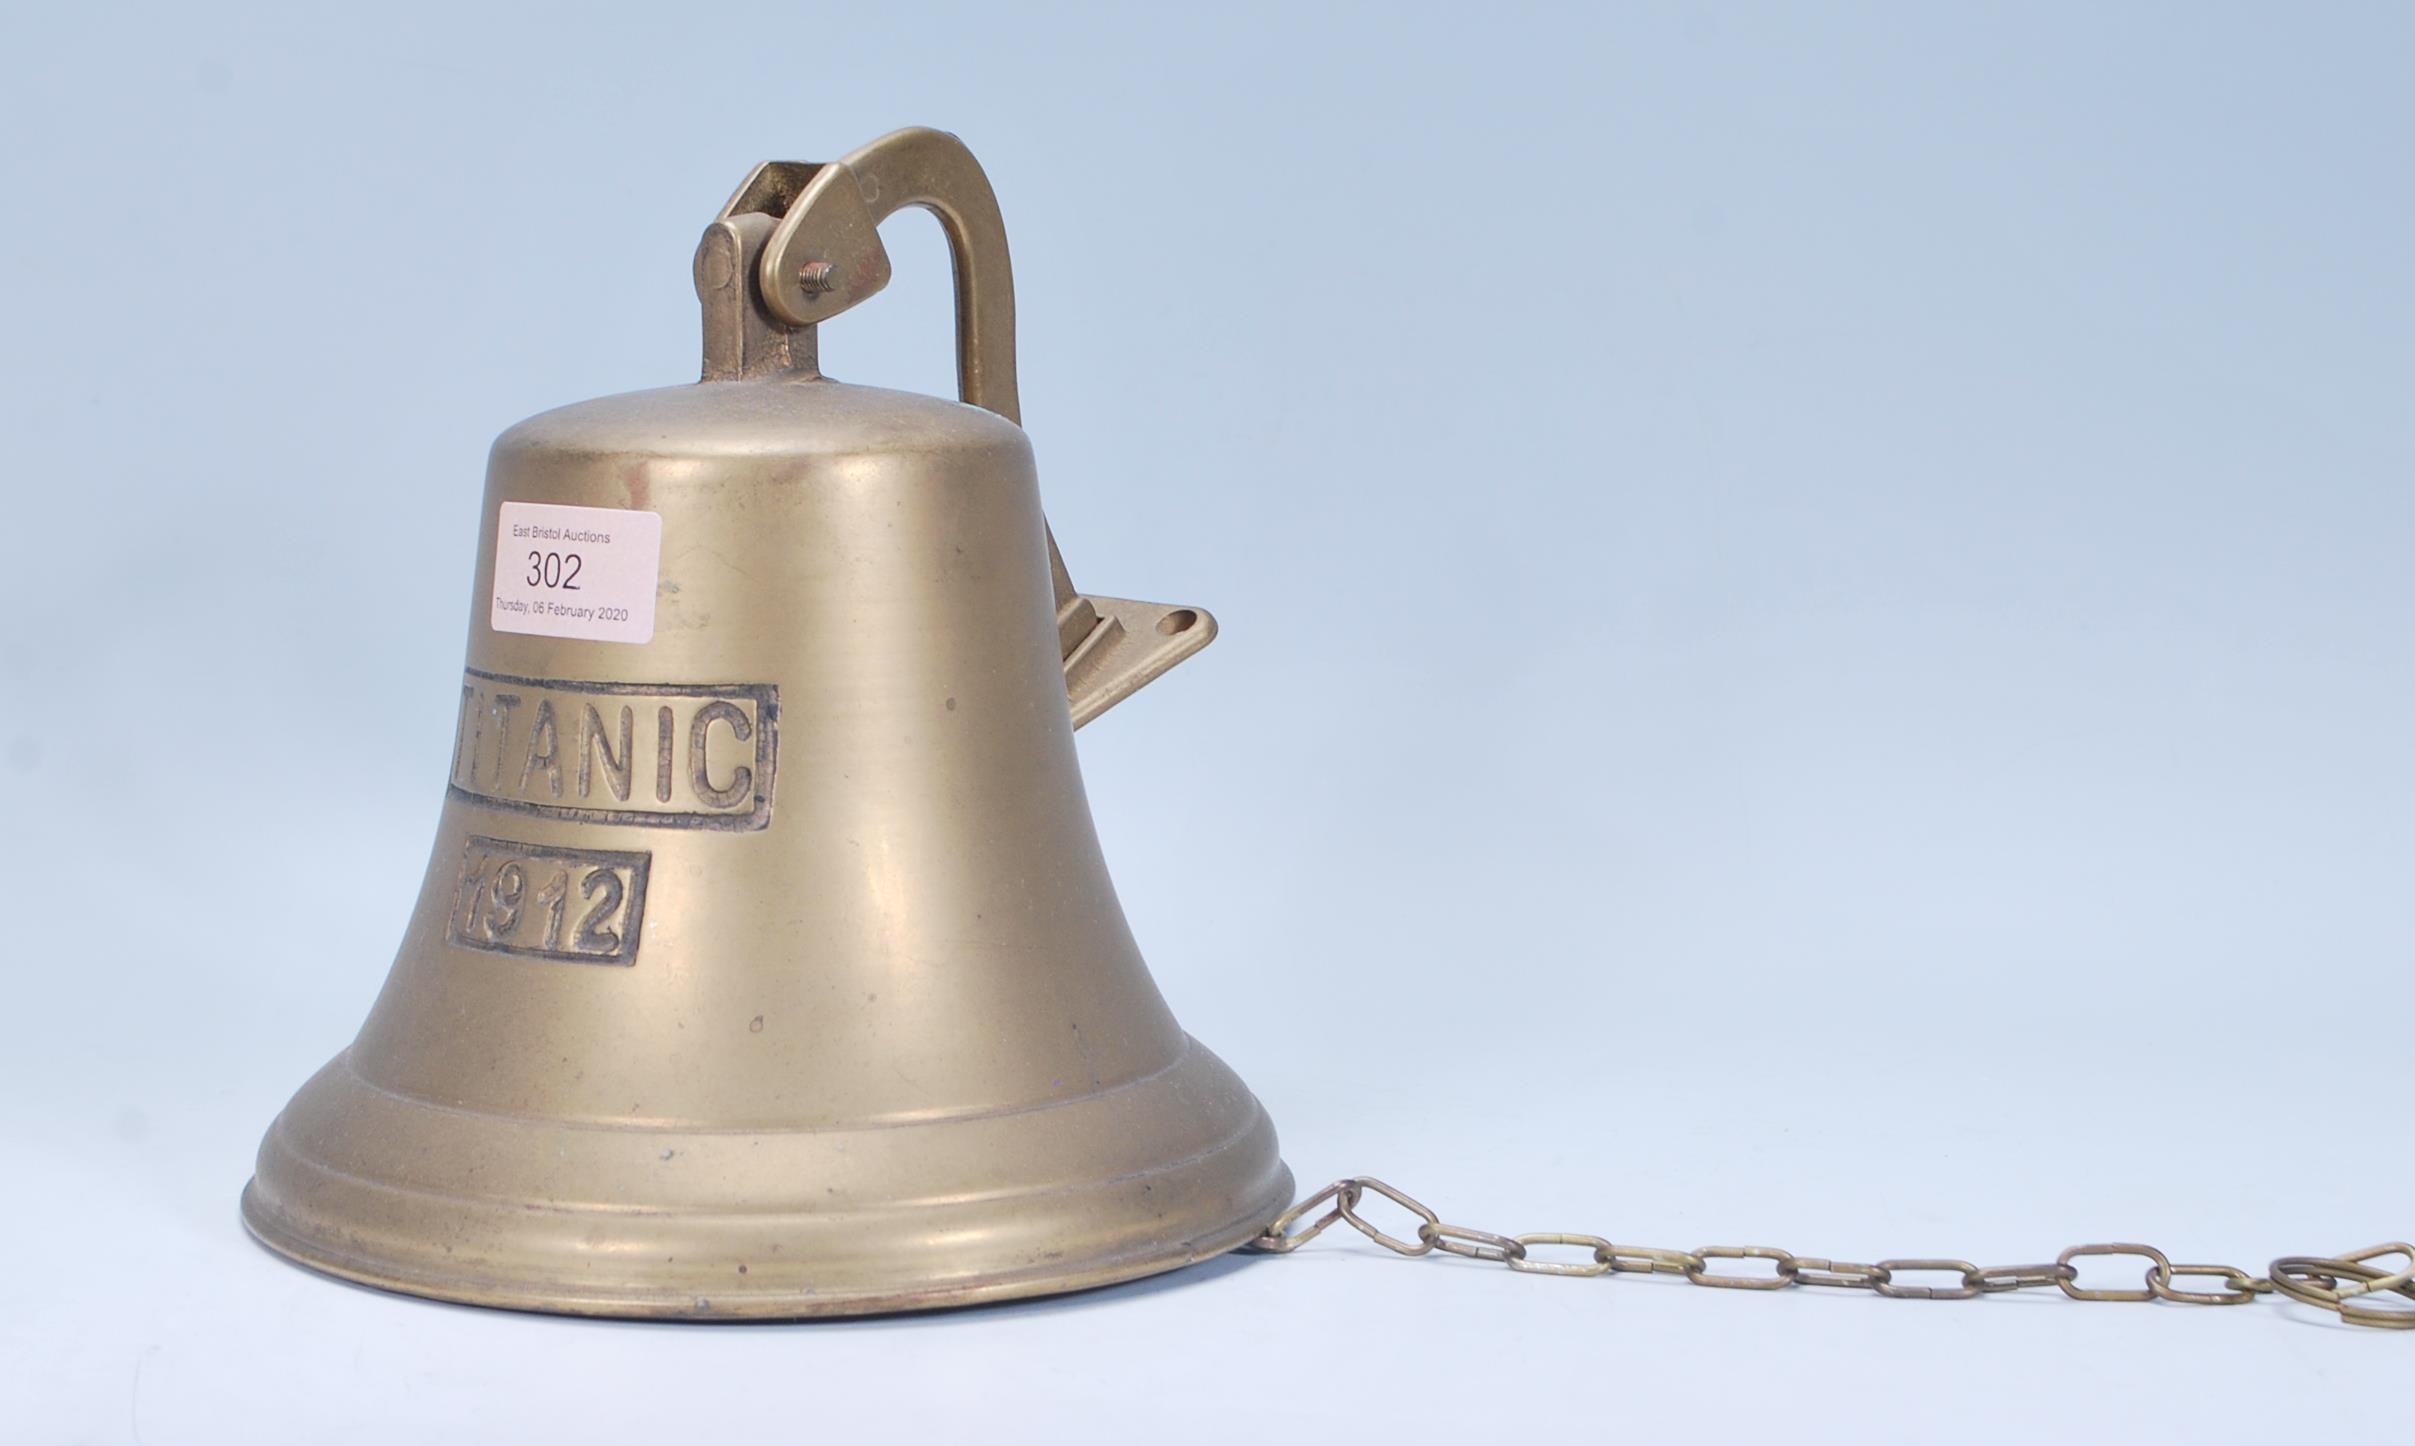 A 20th Century wall mounting brass bell marked Titanic 1912, having a chain attached to the clanger.